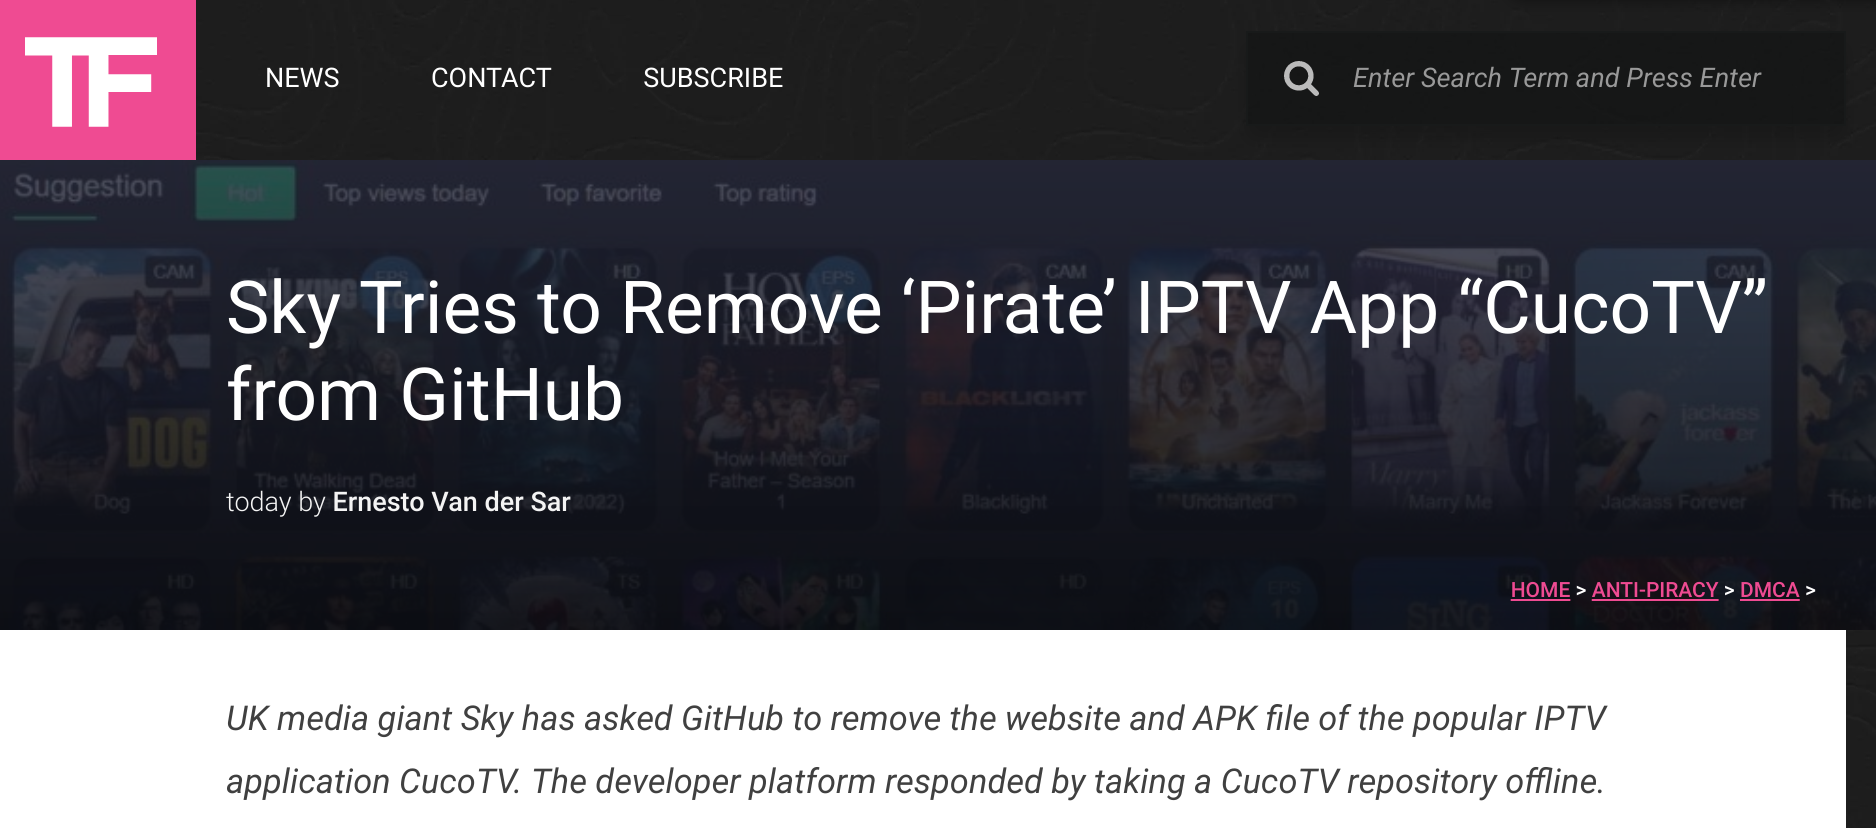 Sky Tries to Remove 'Pirate' IPTV App 'CucoTV' from GitHub